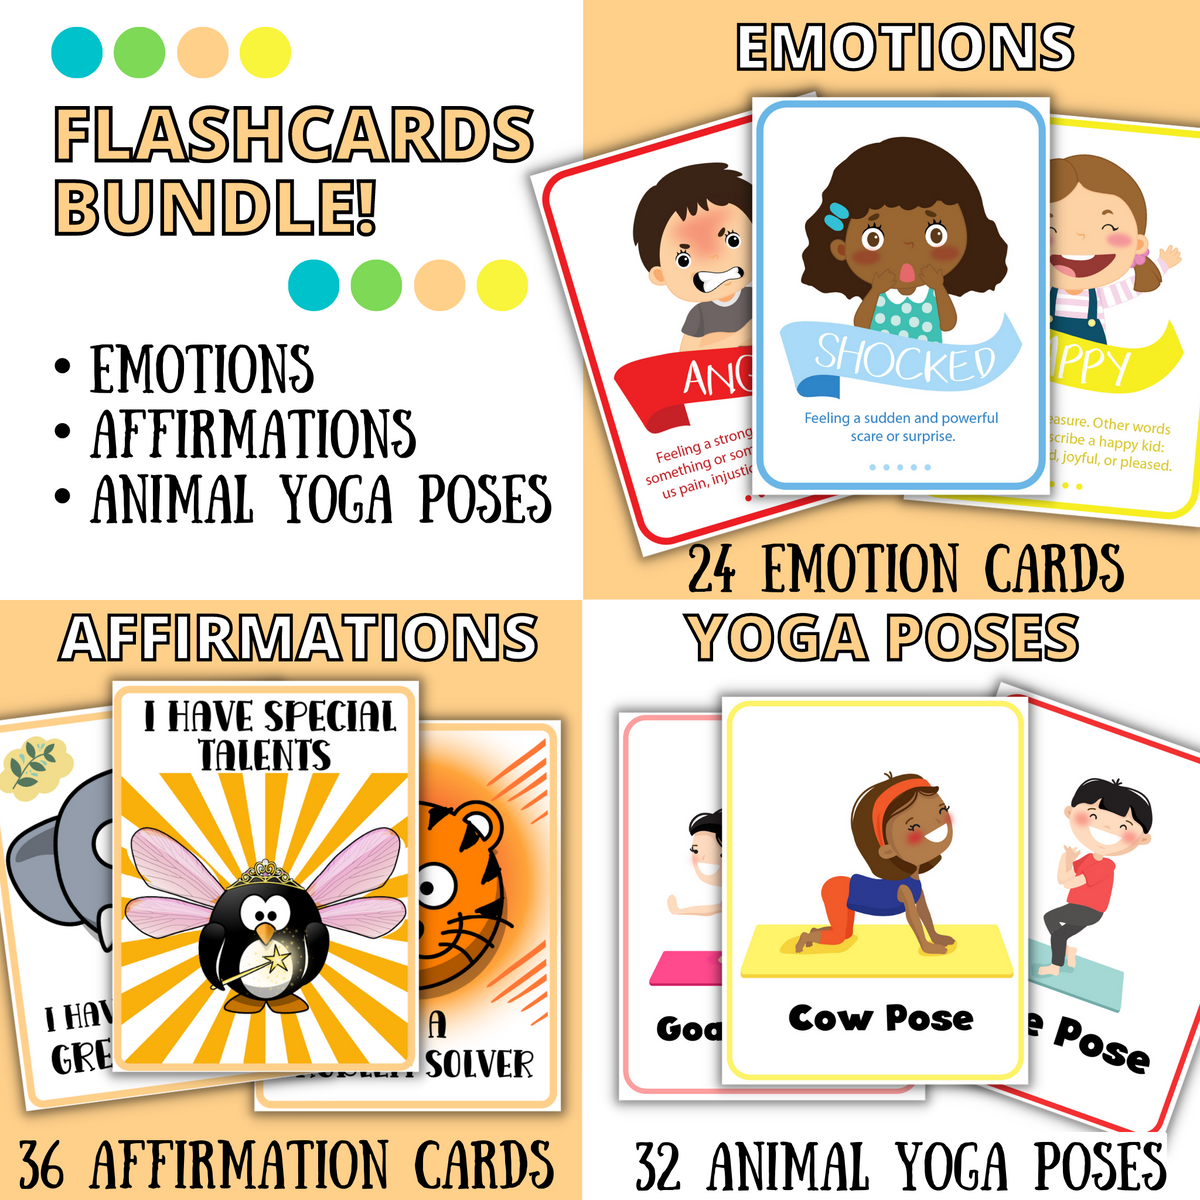 Flashcards Bundle including Emotions, Affirmations and Animal Yoga Poses. All have playful illustrations of children and animals.